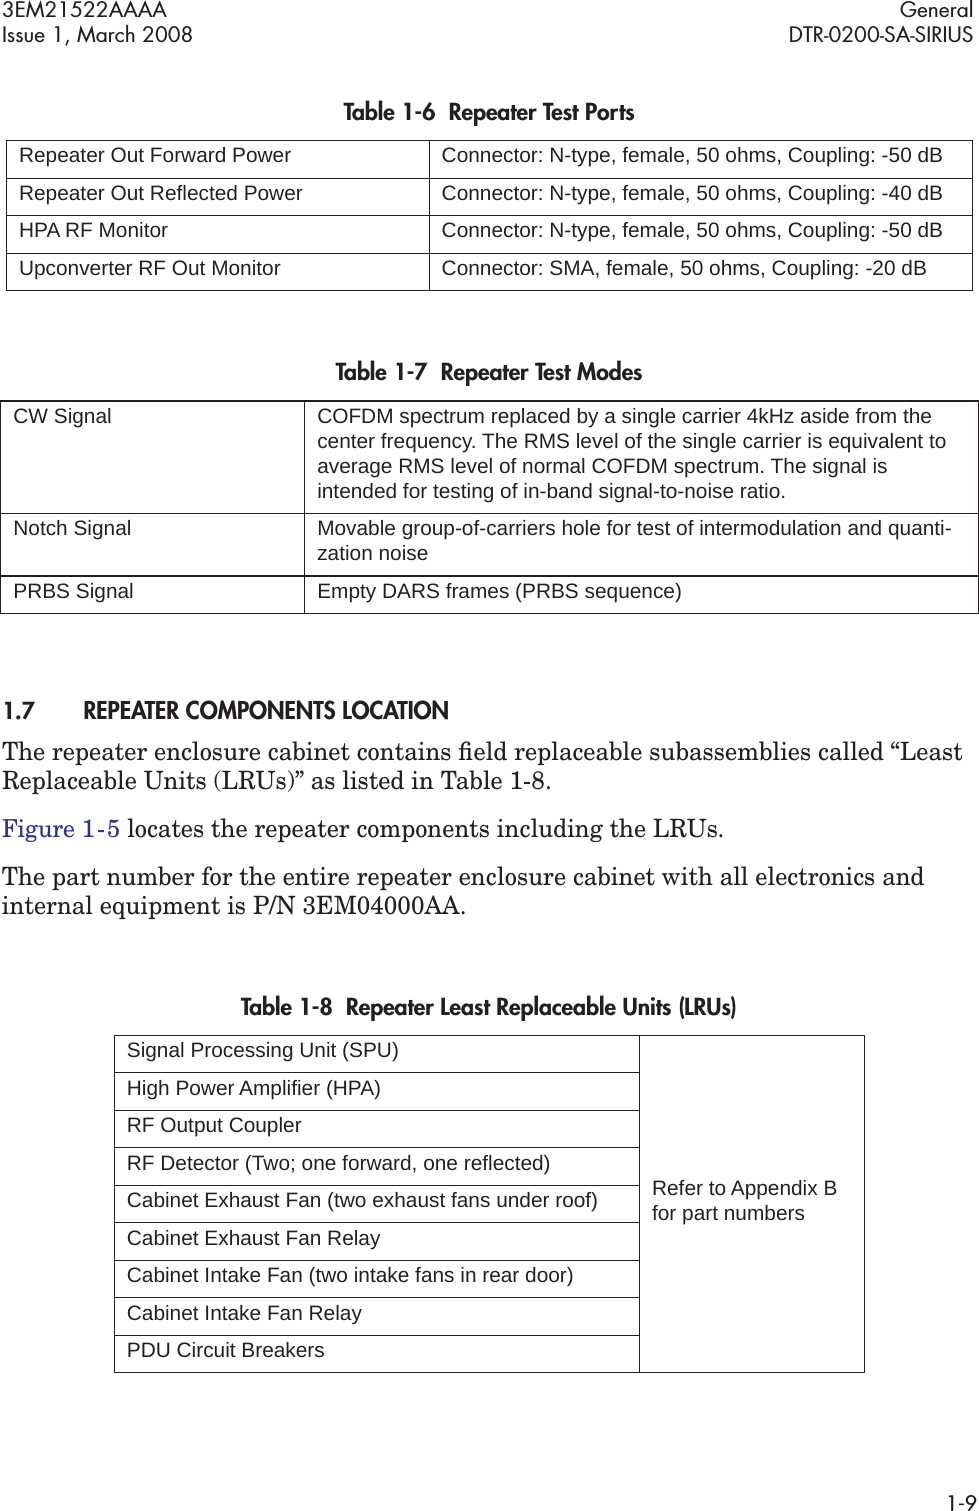 3EM21522AAAA GeneralIssue 1, March 2008 DTR-0200-SA-SIRIUS1-9 1.7 REPEATER COMPONENTS LOCATIONThe repeater enclosure cabinet contains ﬁeld replaceable subassemblies called “Least Replaceable Units (LRUs)” as listed in Table 1-8. Figure 1  -  5 locates the repeater components including the LRUs. The part number for the entire repeater enclosure cabinet with all electronics and internal equipment is P/N 3EM04000AA. Table 1-6  Repeater Test PortsRepeater Out Forward Power Connector: N-type, female, 50 ohms, Coupling: -50 dBRepeater Out Reflected Power Connector: N-type, female, 50 ohms, Coupling: -40 dBHPA RF Monitor Connector: N-type, female, 50 ohms, Coupling: -50 dBUpconverter RF Out Monitor Connector: SMA, female, 50 ohms, Coupling: -20 dBTable 1-7  Repeater Test ModesCW Signal COFDM spectrum replaced by a single carrier 4kHz aside from the center frequency. The RMS level of the single carrier is equivalent to average RMS level of normal COFDM spectrum. The signal is intended for testing of in-band signal-to-noise ratio.Notch Signal Movable group-of-carriers hole for test of intermodulation and quanti-zation noisePRBS Signal Empty DARS frames (PRBS sequence)Table 1-8  Repeater Least Replaceable Units (LRUs)Signal Processing Unit (SPU)Refer to Appendix B for part numbersHigh Power Amplifier (HPA)RF Output CouplerRF Detector (Two; one forward, one reflected)Cabinet Exhaust Fan (two exhaust fans under roof)Cabinet Exhaust Fan RelayCabinet Intake Fan (two intake fans in rear door)Cabinet Intake Fan RelayPDU Circuit Breakers